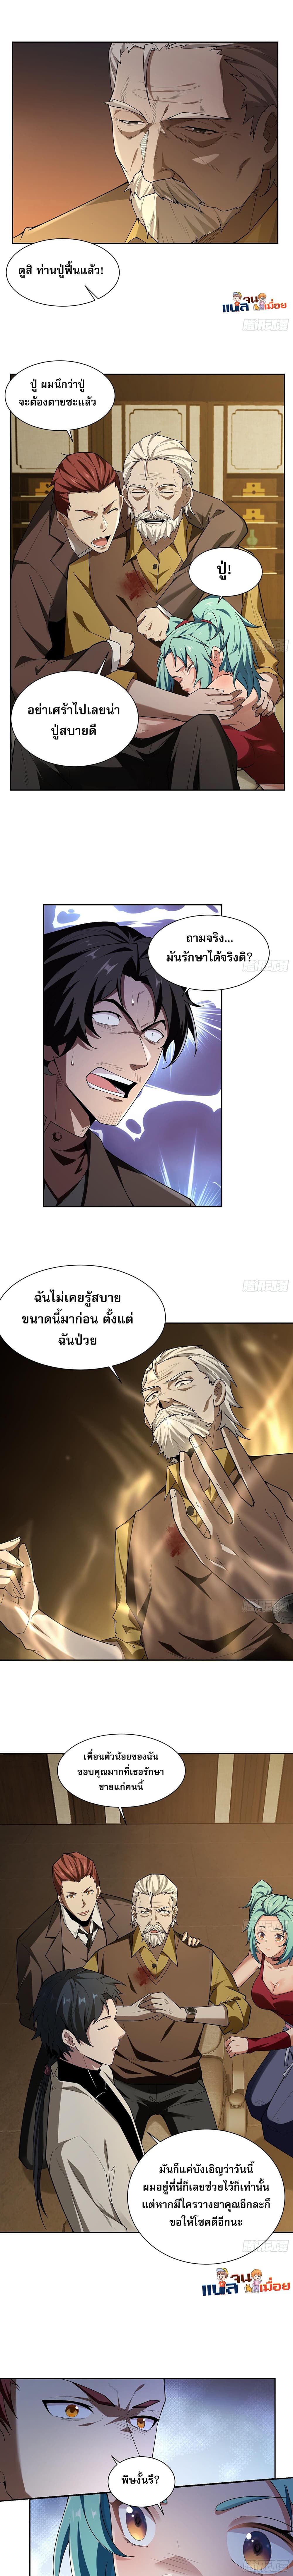 The All-Knowing Cultivator ผู้ฝึกตนผู้รอบรู้ 4/11